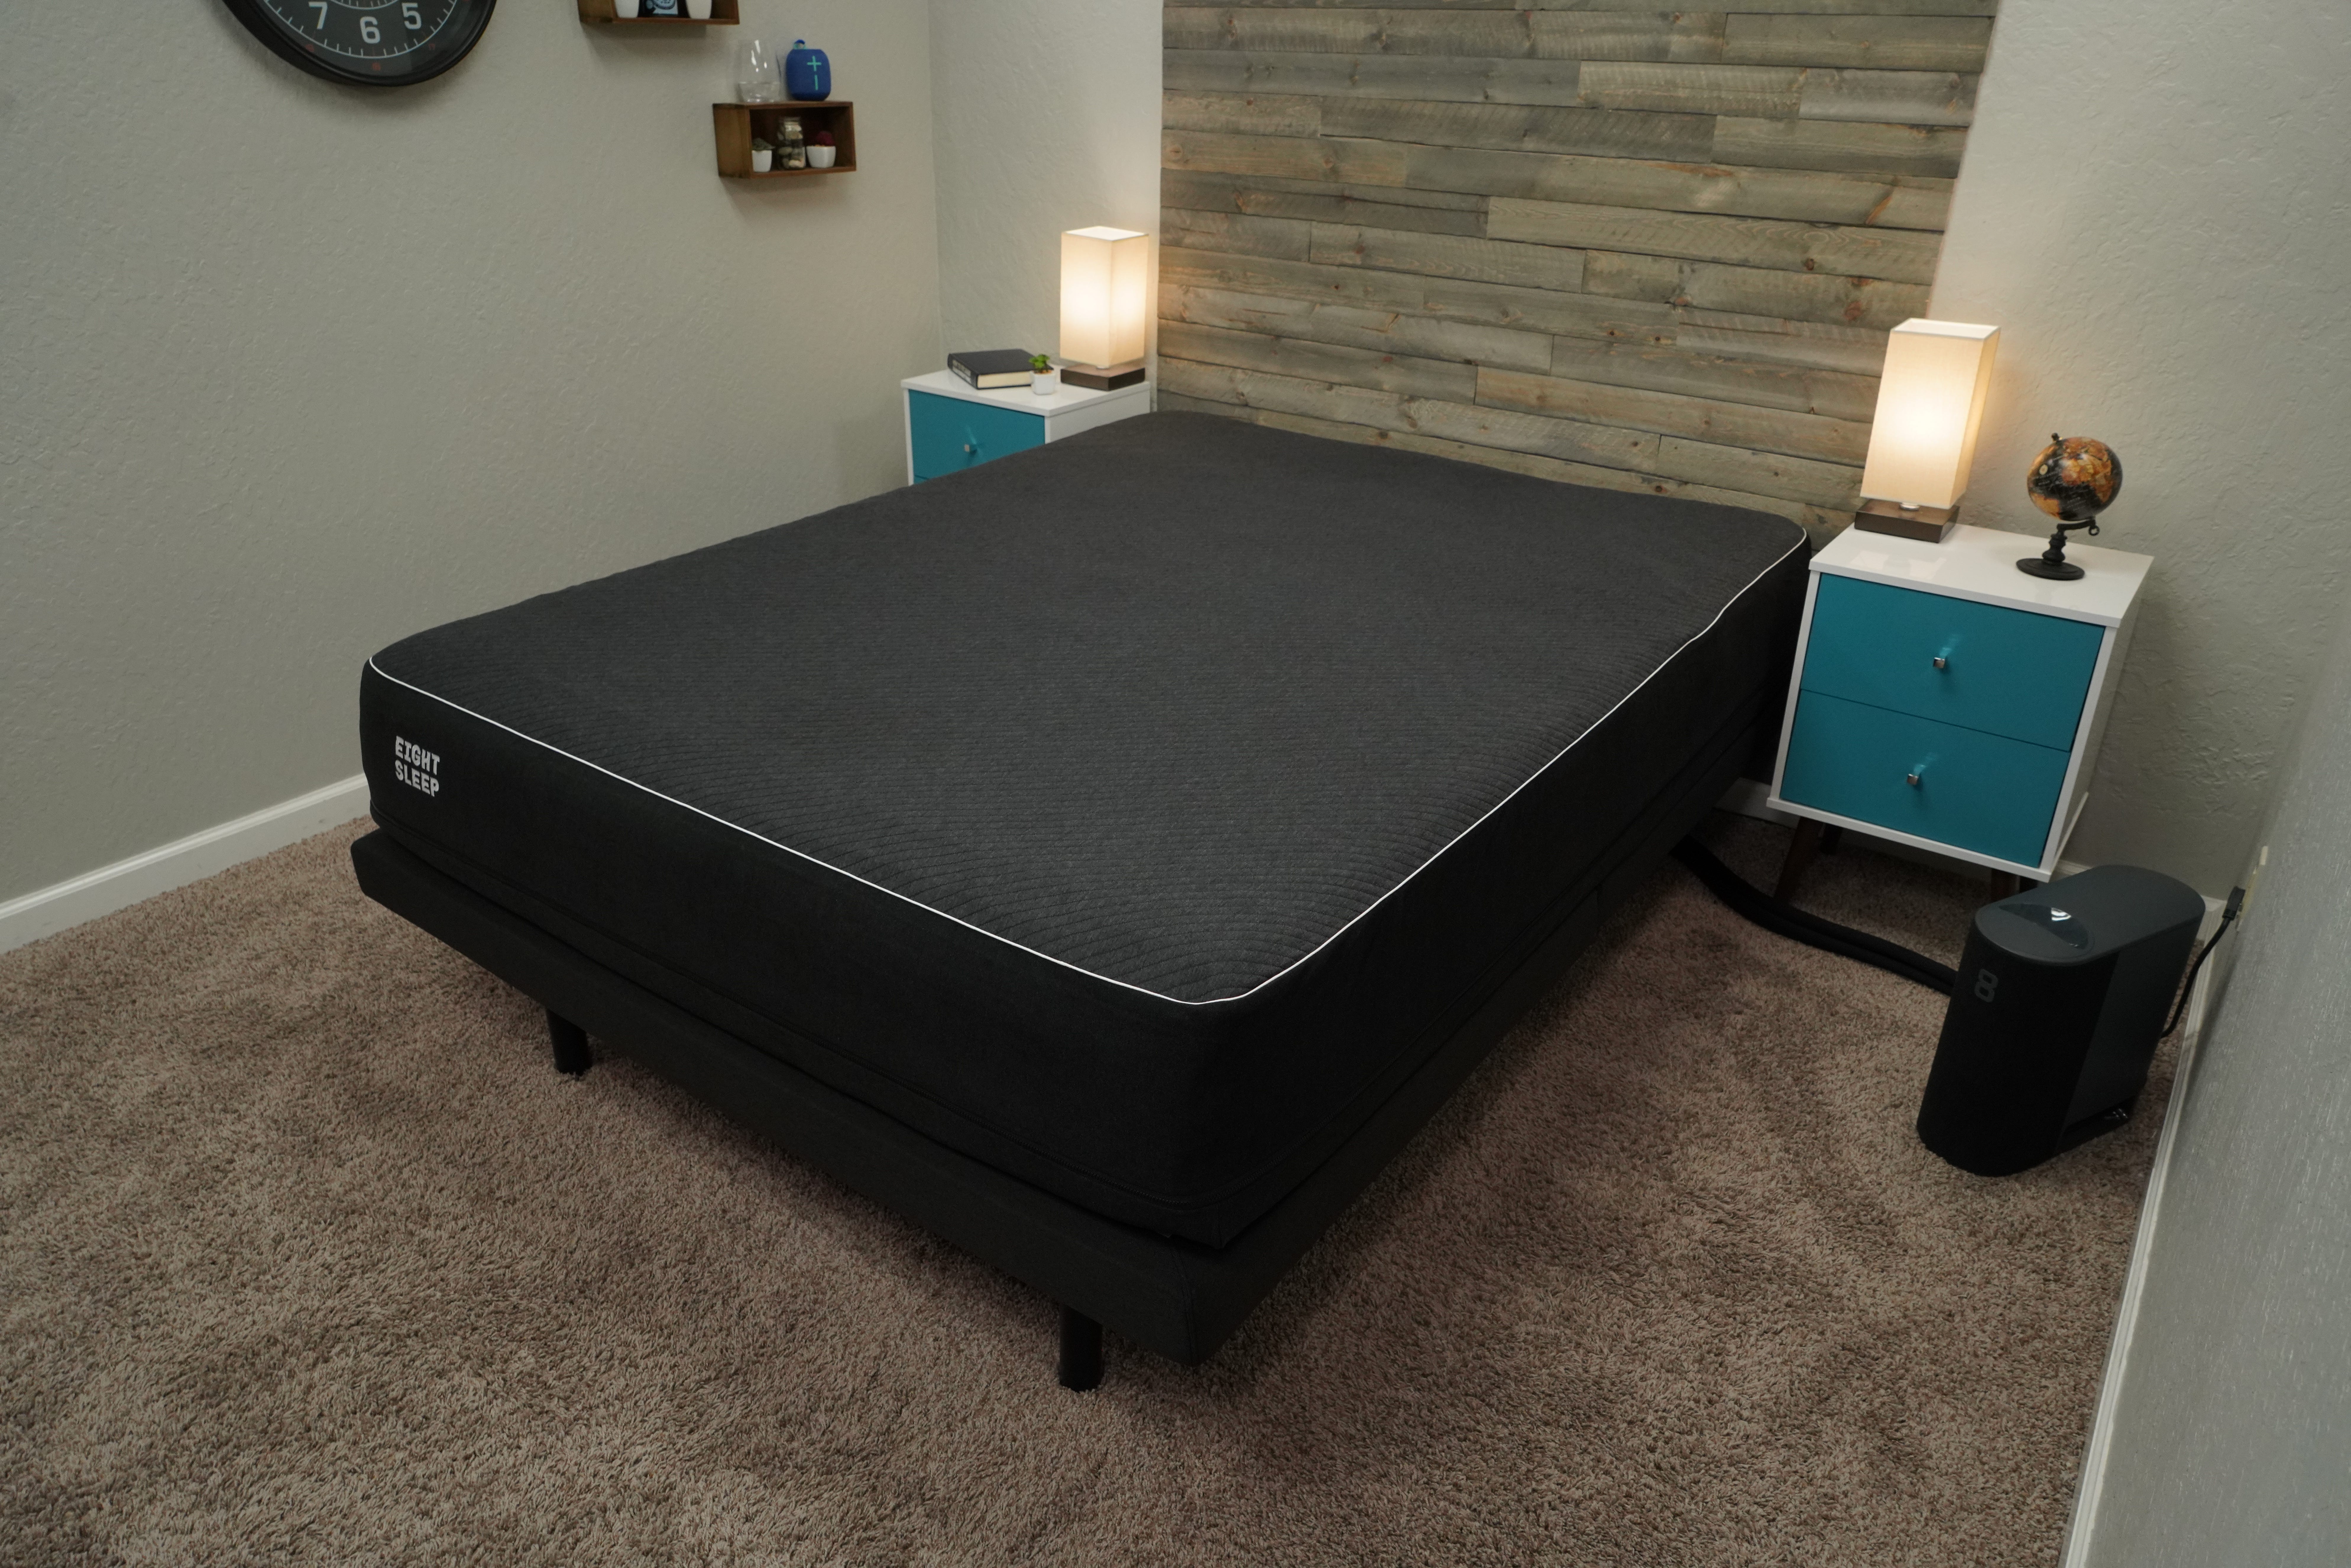 Enjoy a clean, comfortable sleep every night with the 8-Unit